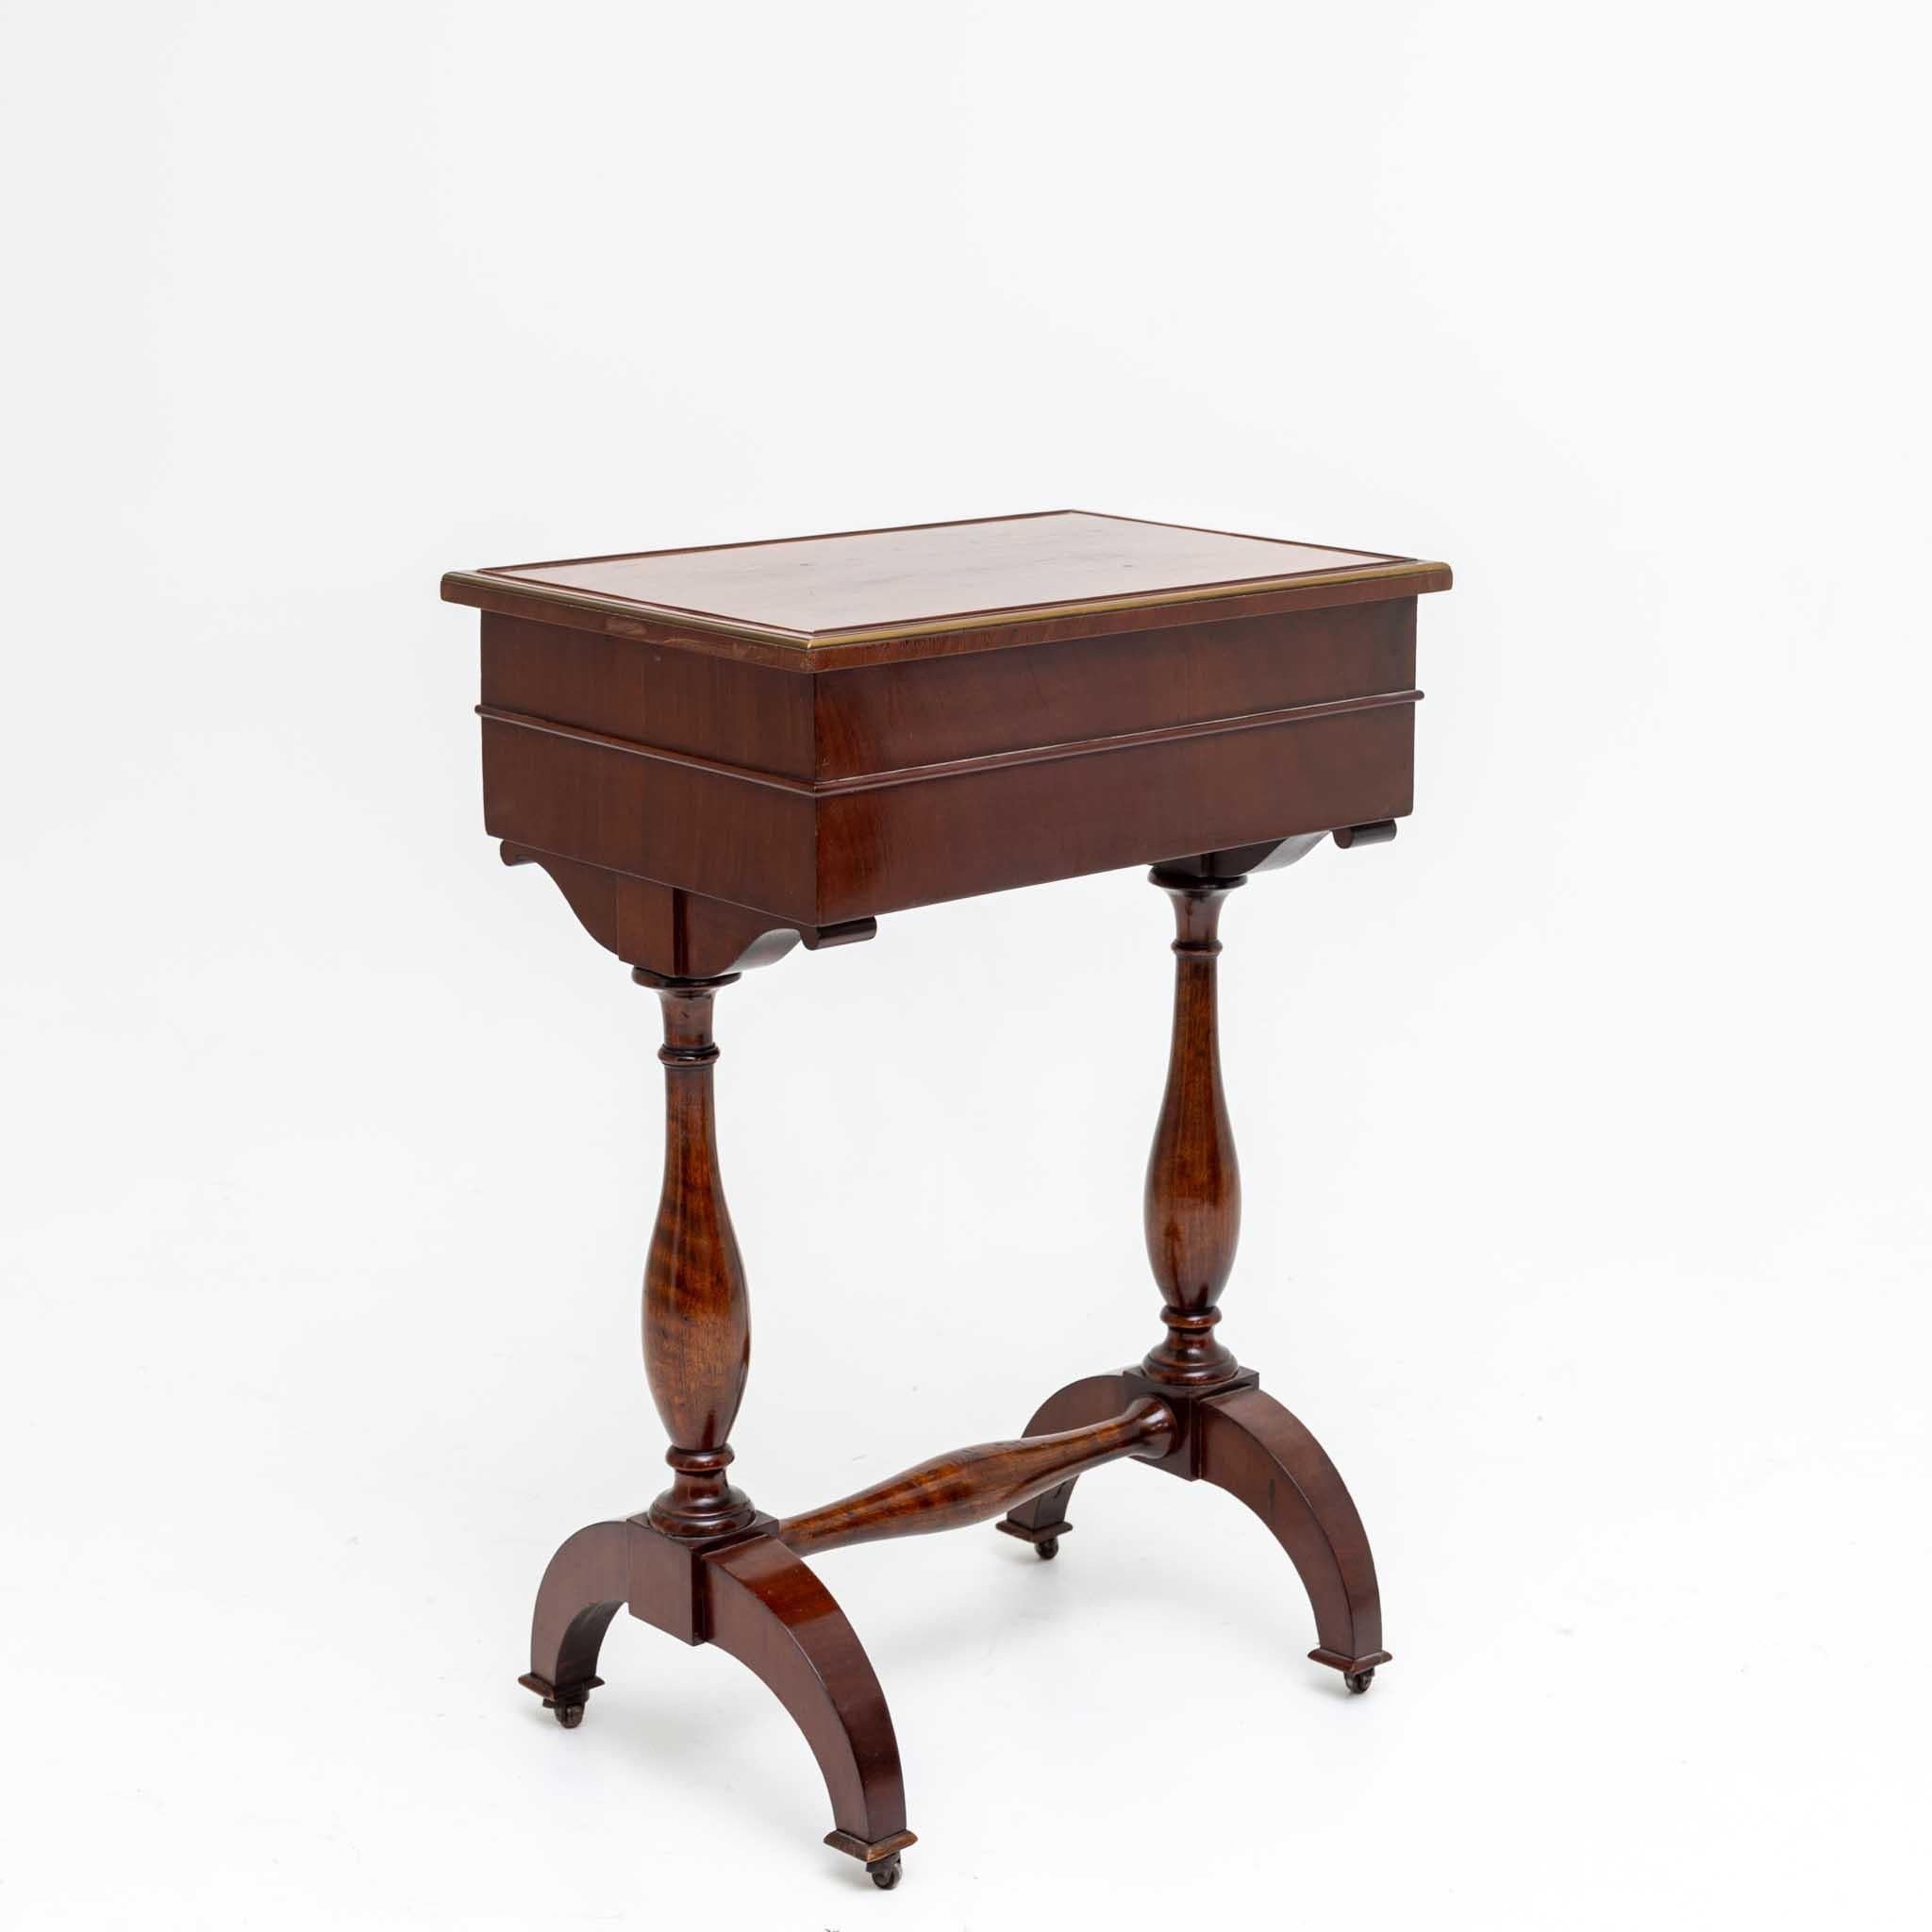 Wood Sewing Table, Jegenstorf Castle, early 19th Century